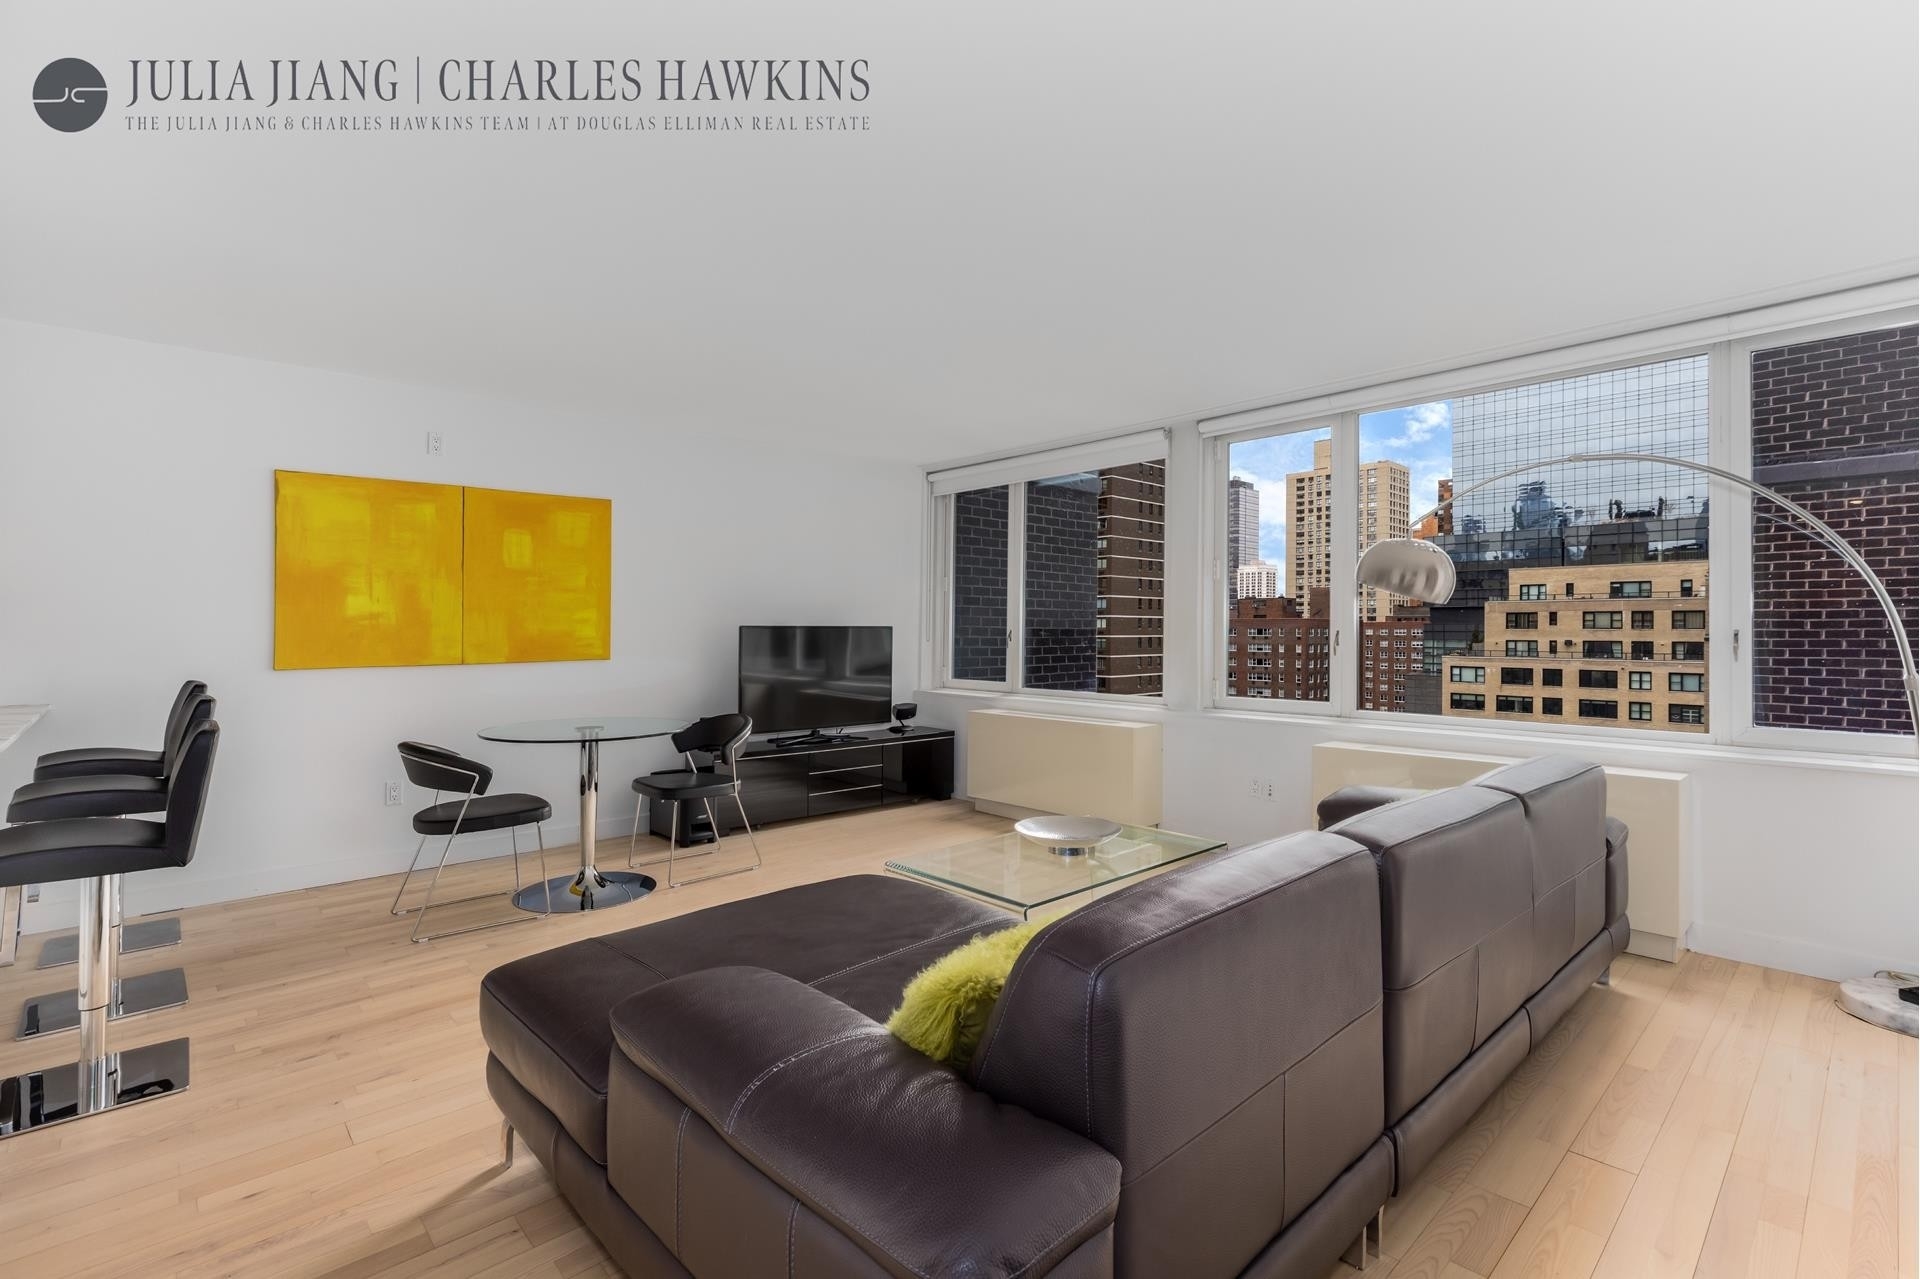 Property at The Sheffield, 322 W 57TH ST, 22E Hell's Kitchen, New York, New York 10019